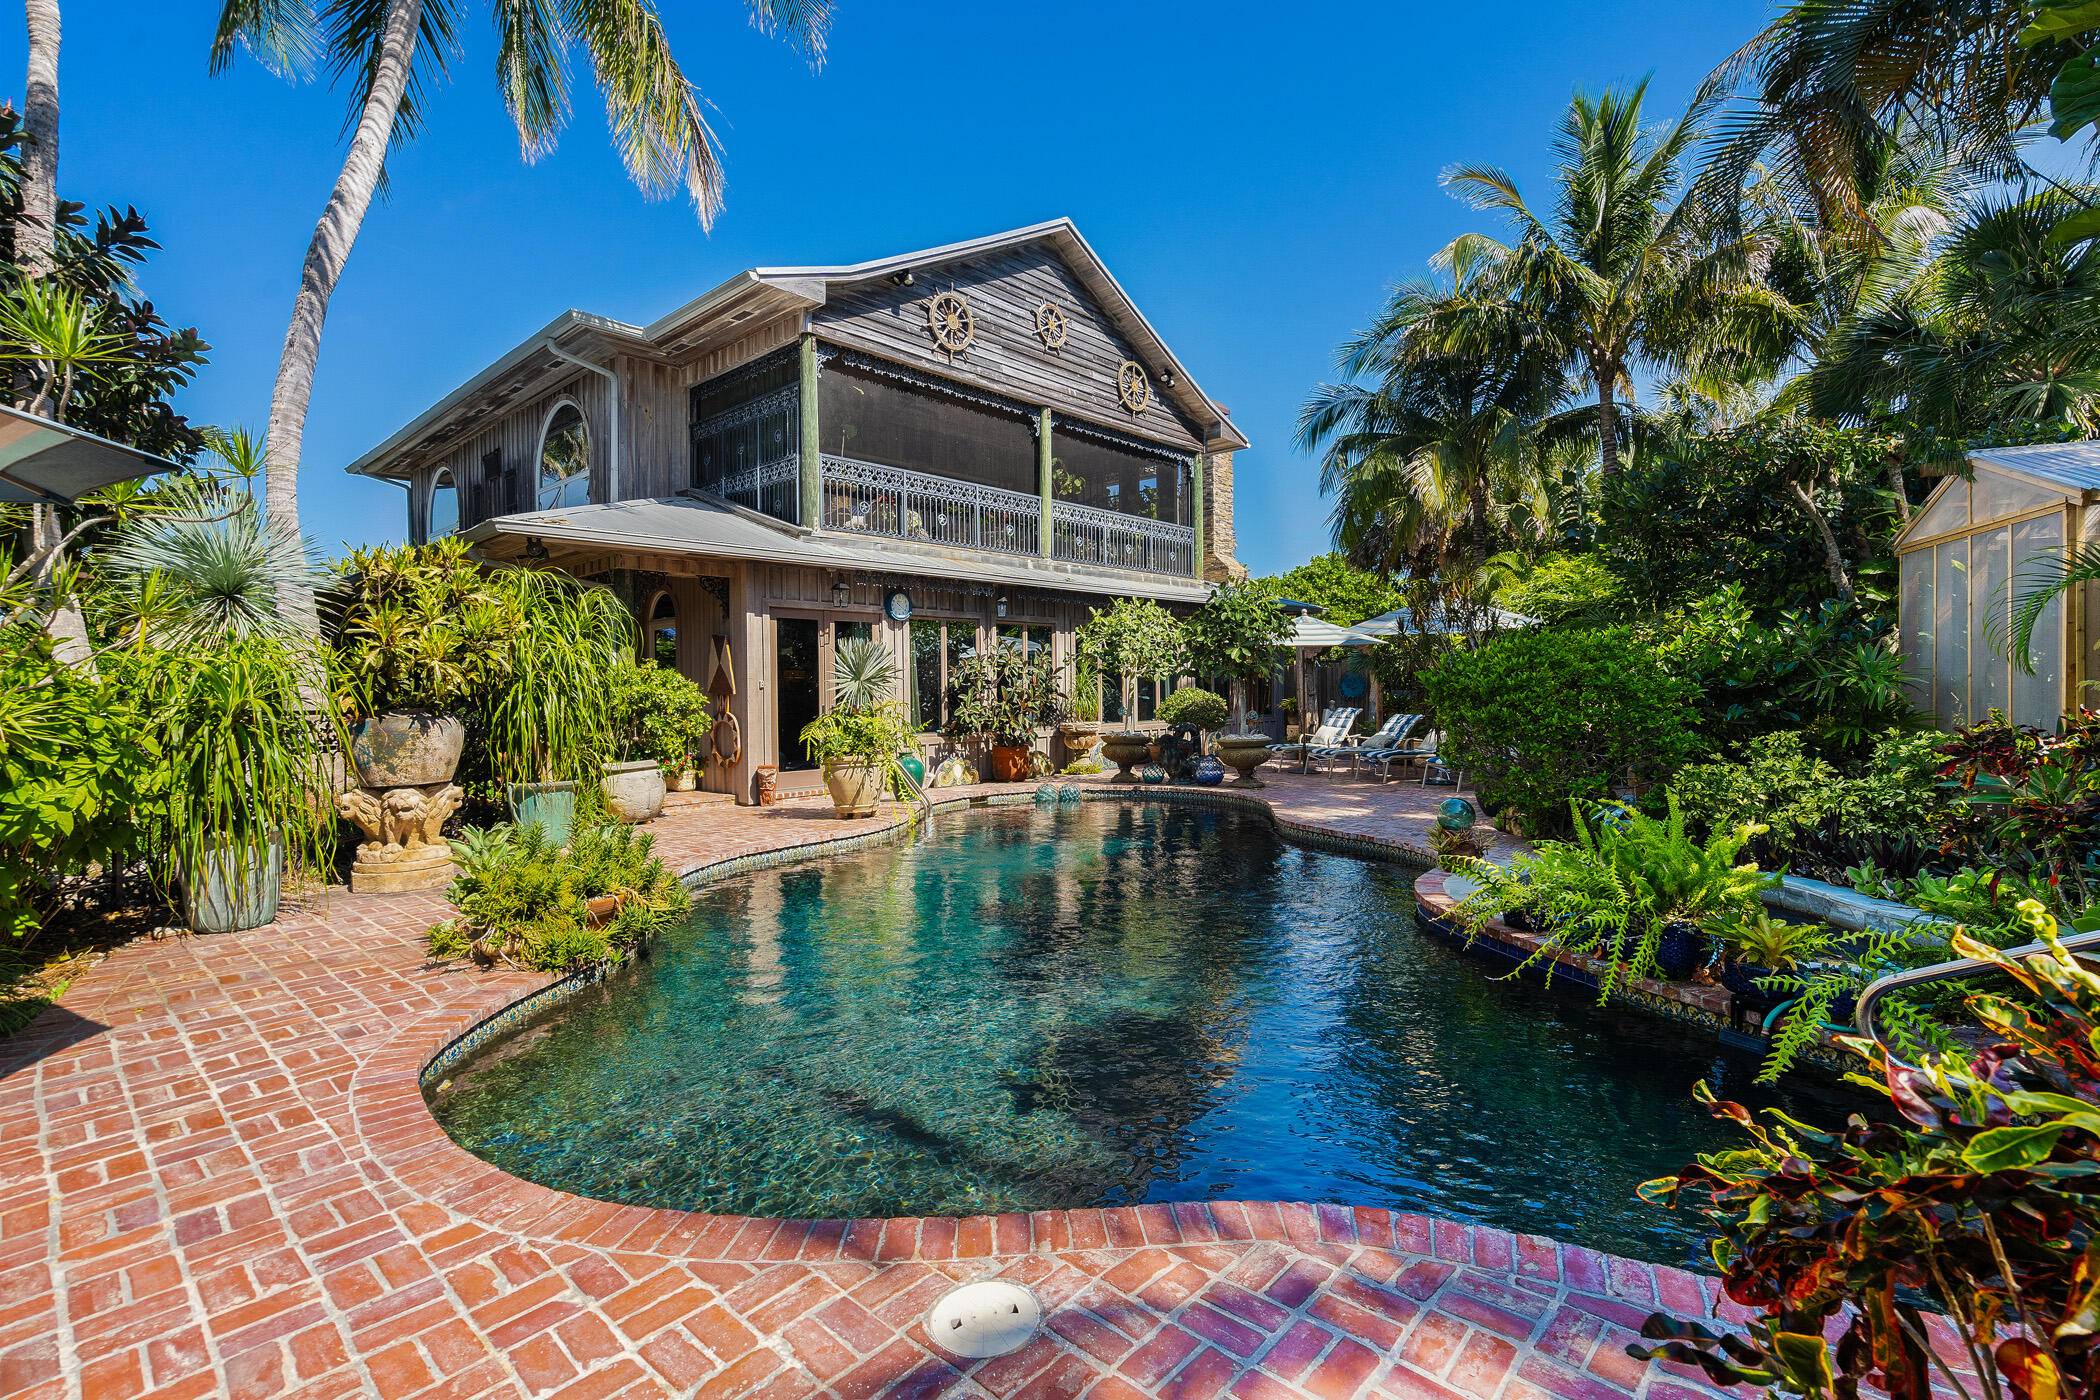 Reminiscent of Hemingway's Florida, this unique property exudes character and charm.